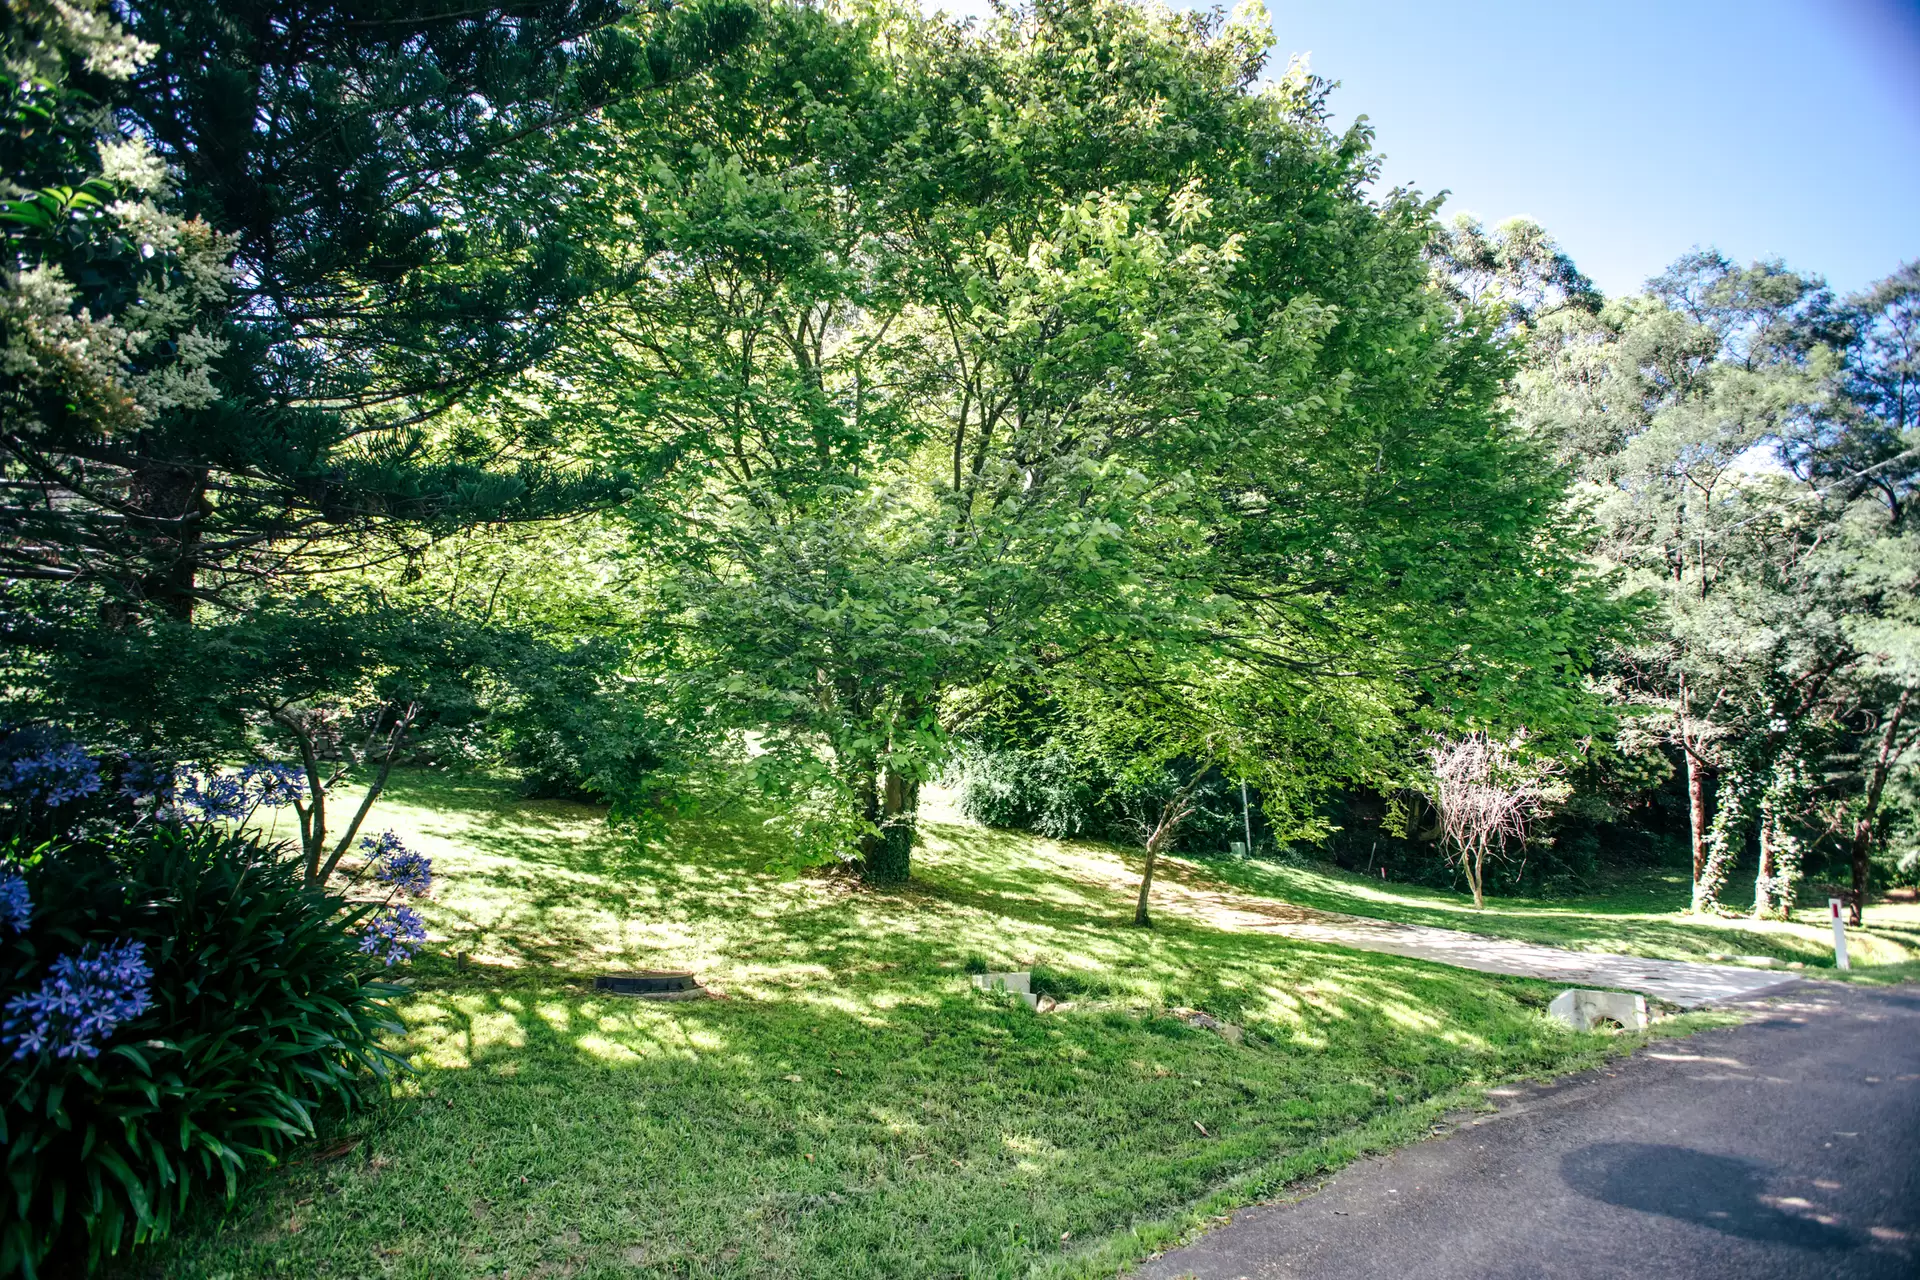 Photo #9: 7 Tulloona Avenue, Bowral - Sold by Drew Lindsay Sotheby's International Realty